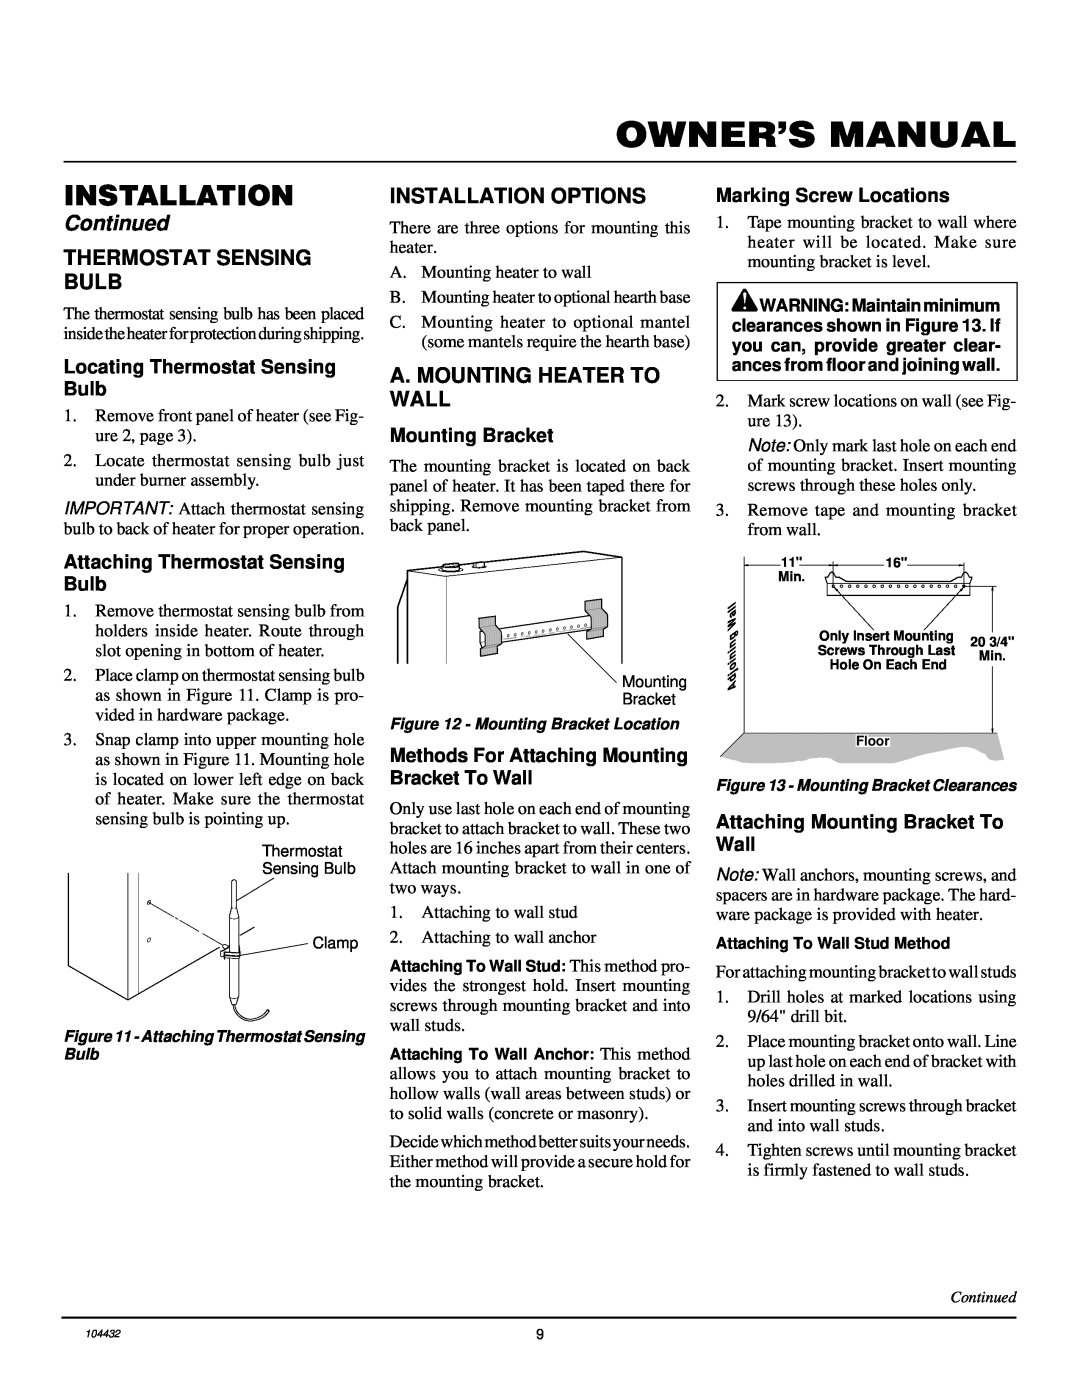 Vanguard Heating VMH3000TP Owner’S Manual, Installation, Continued, Locating Thermostat Sensing Bulb, Mounting Bracket 